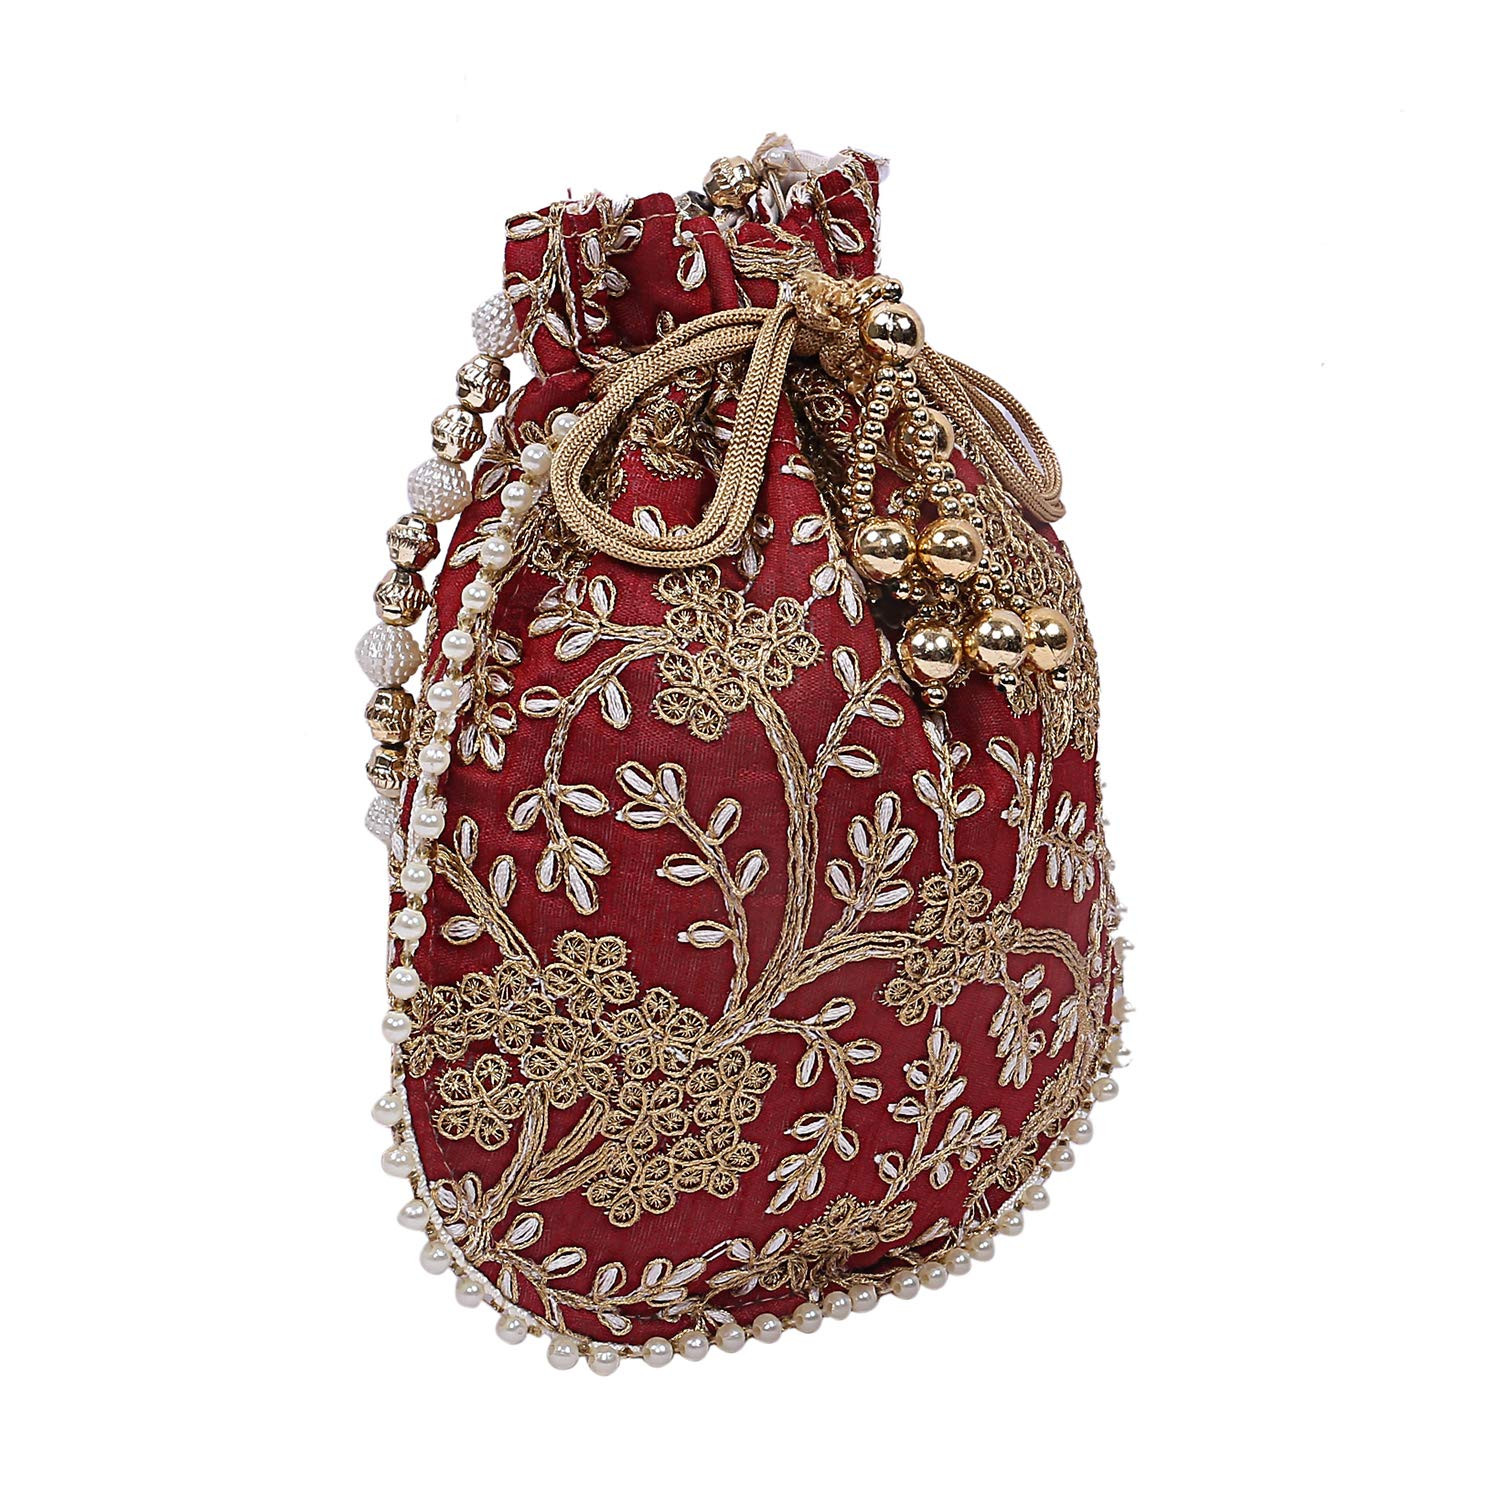 Kuber Industries Embroidery Drawstring Potli|Hand Purse With Gold Pearl Border & Handle For Woman,Girls Pack of 2 (Maroon & Pink)